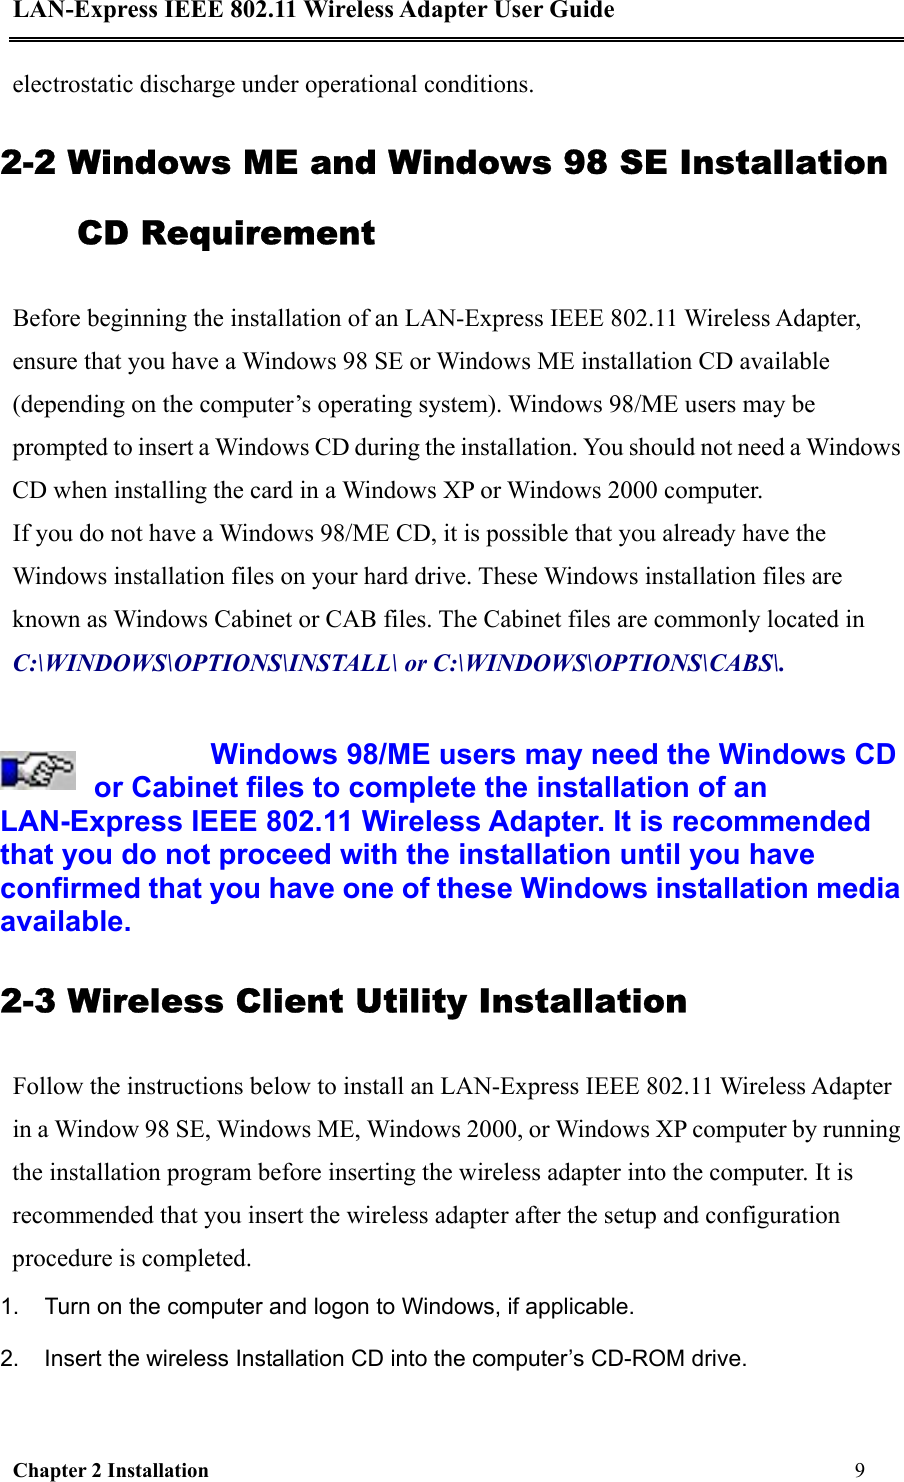 LAN-Express IEEE 802.11 Wireless Adapter User Guide Chapter 2 Installation                                                              9                                           electrostatic discharge under operational conditions. 2-2 Windows ME and Windows 98 SE Installation CD Requirement Before beginning the installation of an LAN-Express IEEE 802.11 Wireless Adapter, ensure that you have a Windows 98 SE or Windows ME installation CD available (depending on the computer’s operating system). Windows 98/ME users may be prompted to insert a Windows CD during the installation. You should not need a Windows CD when installing the card in a Windows XP or Windows 2000 computer.  If you do not have a Windows 98/ME CD, it is possible that you already have the Windows installation files on your hard drive. These Windows installation files are known as Windows Cabinet or CAB files. The Cabinet files are commonly located in C:\WINDOWS\OPTIONS\INSTALL\ or C:\WINDOWS\OPTIONS\CABS\.   Windows 98/ME users may need the Windows CD or Cabinet files to complete the installation of an LAN-Express IEEE 802.11 Wireless Adapter. It is recommended that you do not proceed with the installation until you have confirmed that you have one of these Windows installation media available. 2-3 Wireless Client Utility Installation  Follow the instructions below to install an LAN-Express IEEE 802.11 Wireless Adapter in a Window 98 SE, Windows ME, Windows 2000, or Windows XP computer by running the installation program before inserting the wireless adapter into the computer. It is recommended that you insert the wireless adapter after the setup and configuration procedure is completed.  1.  Turn on the computer and logon to Windows, if applicable.  2.  Insert the wireless Installation CD into the computer’s CD-ROM drive.  